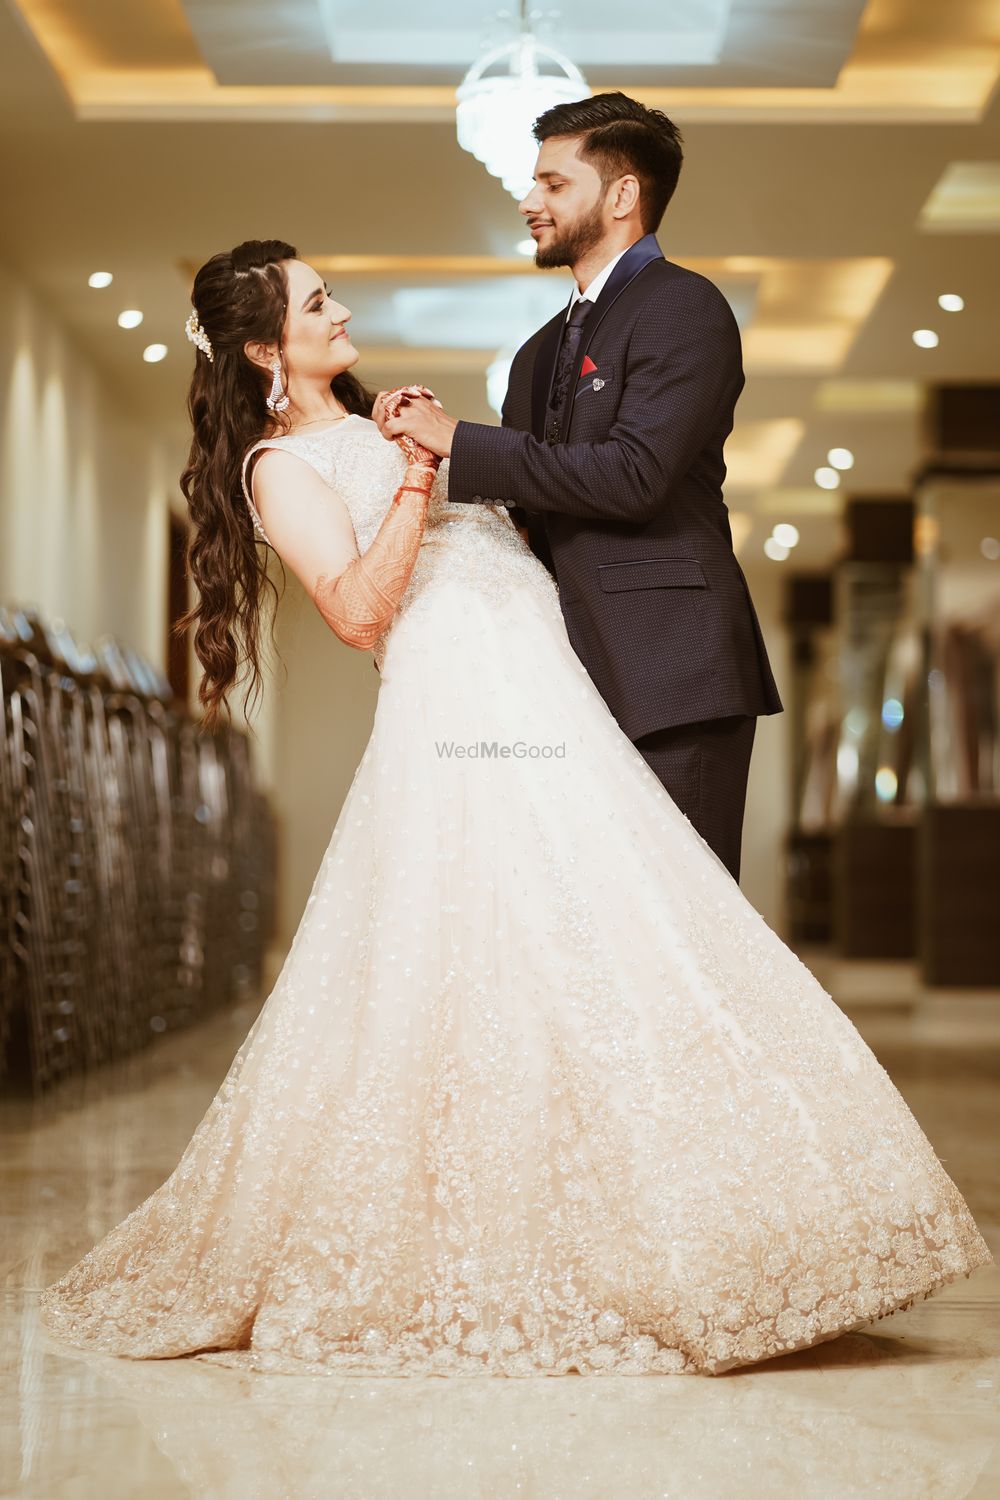 Photo From gunjan weds SIDHARTH - By Archit Sood Photography